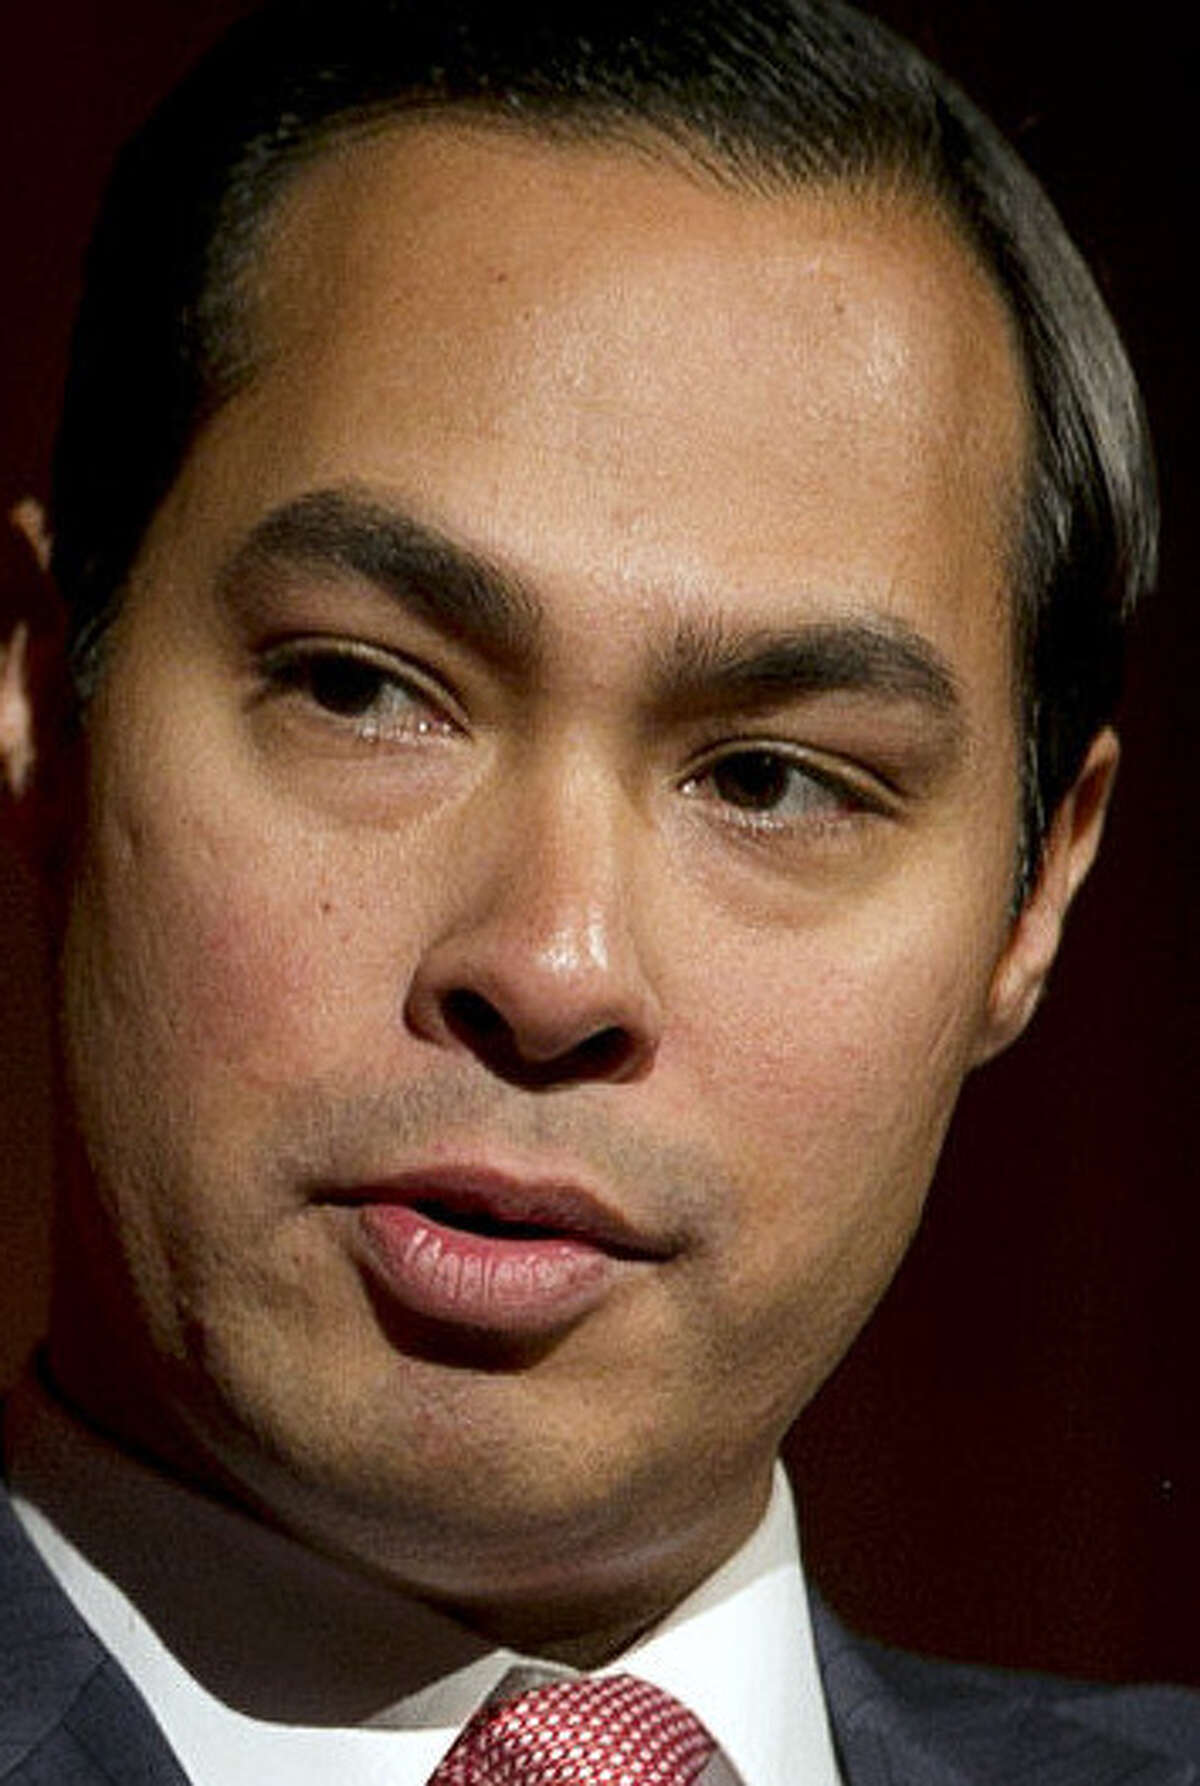 2. San Antonio Mayor Julián Castro is not running for office this year, but has a growing national profile, a Mexican ancestry, and a progressive stance on immigration policy, including supporting a pathway to citizenship for undocumented immigrants.